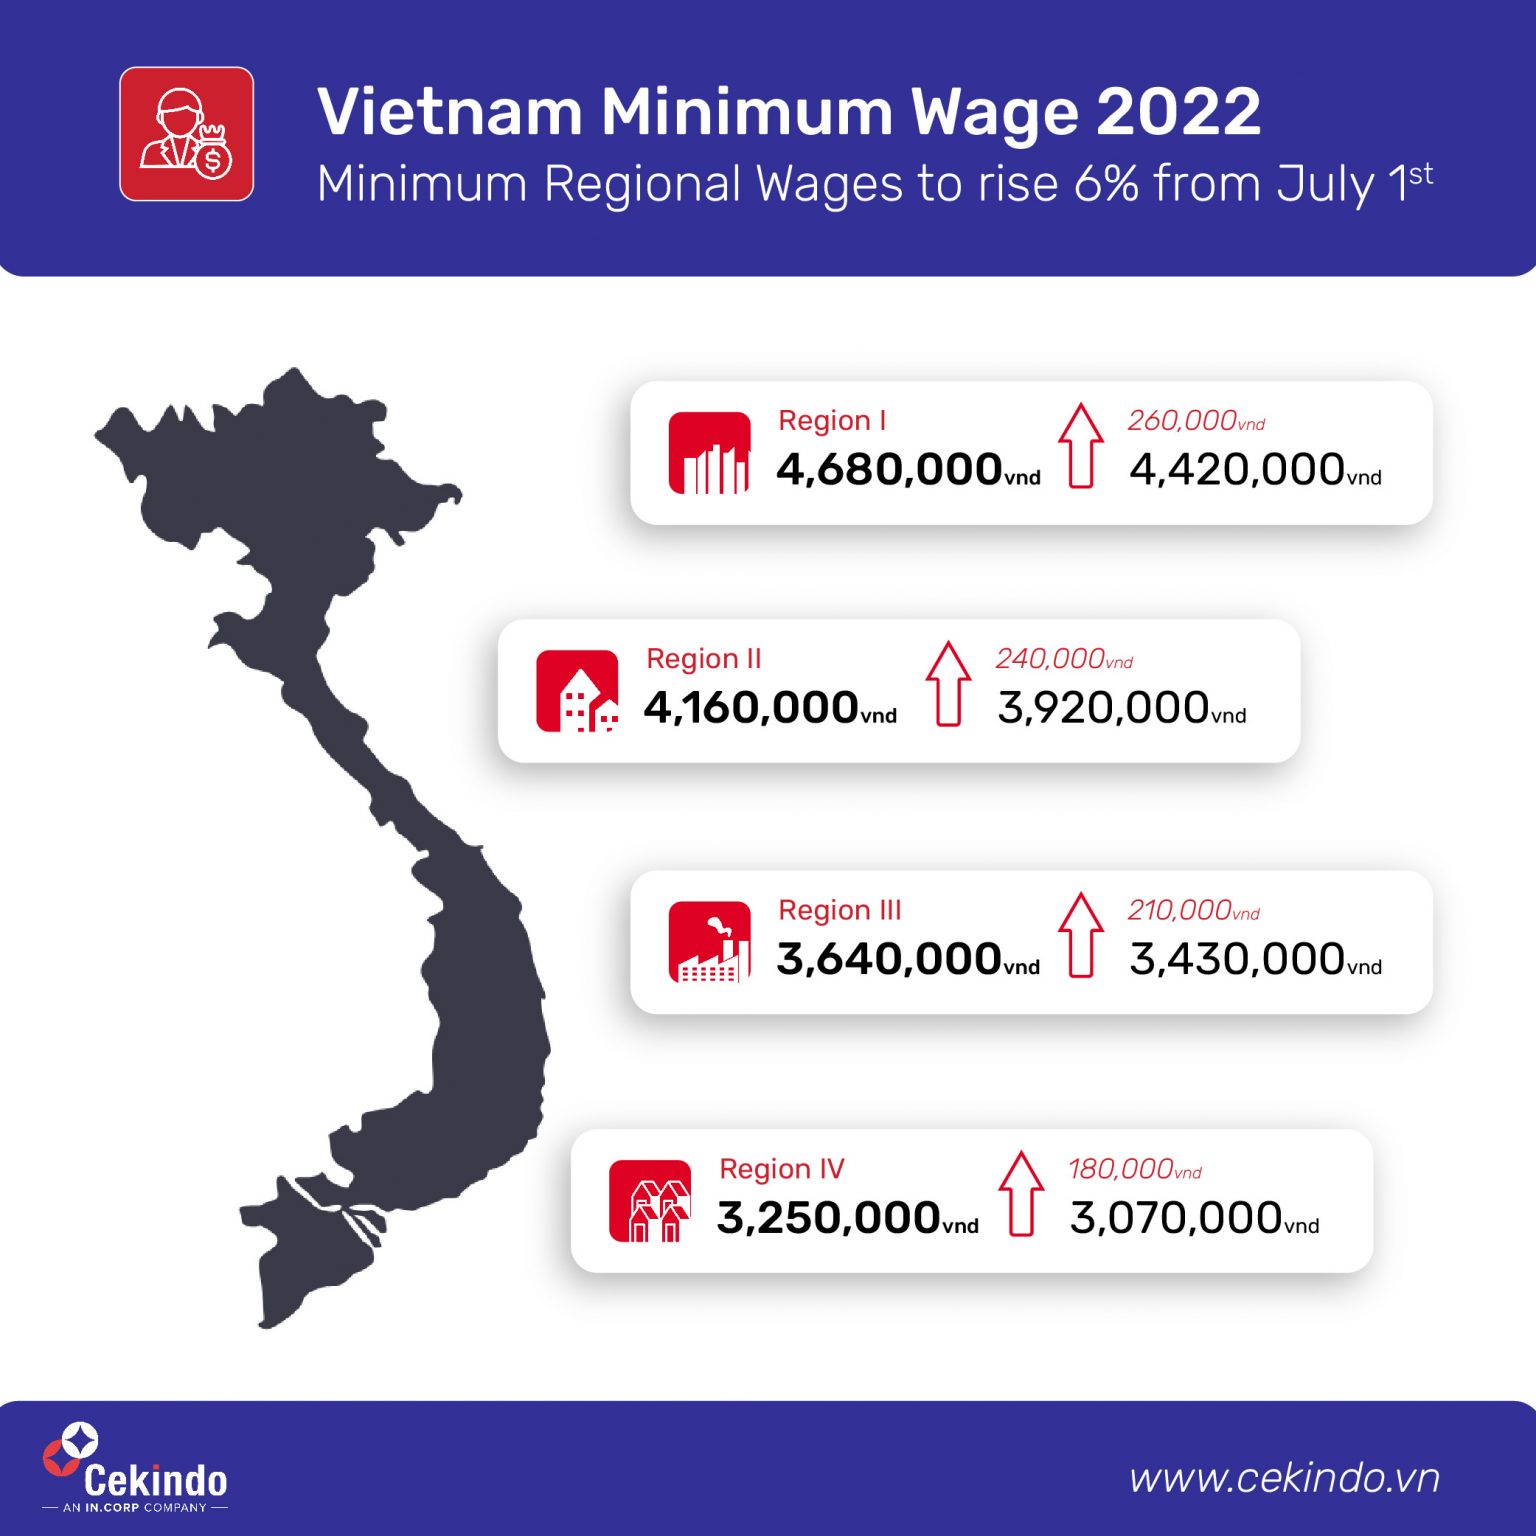 Vietnam's Minimum Wage to see 6 Increase from July 2022